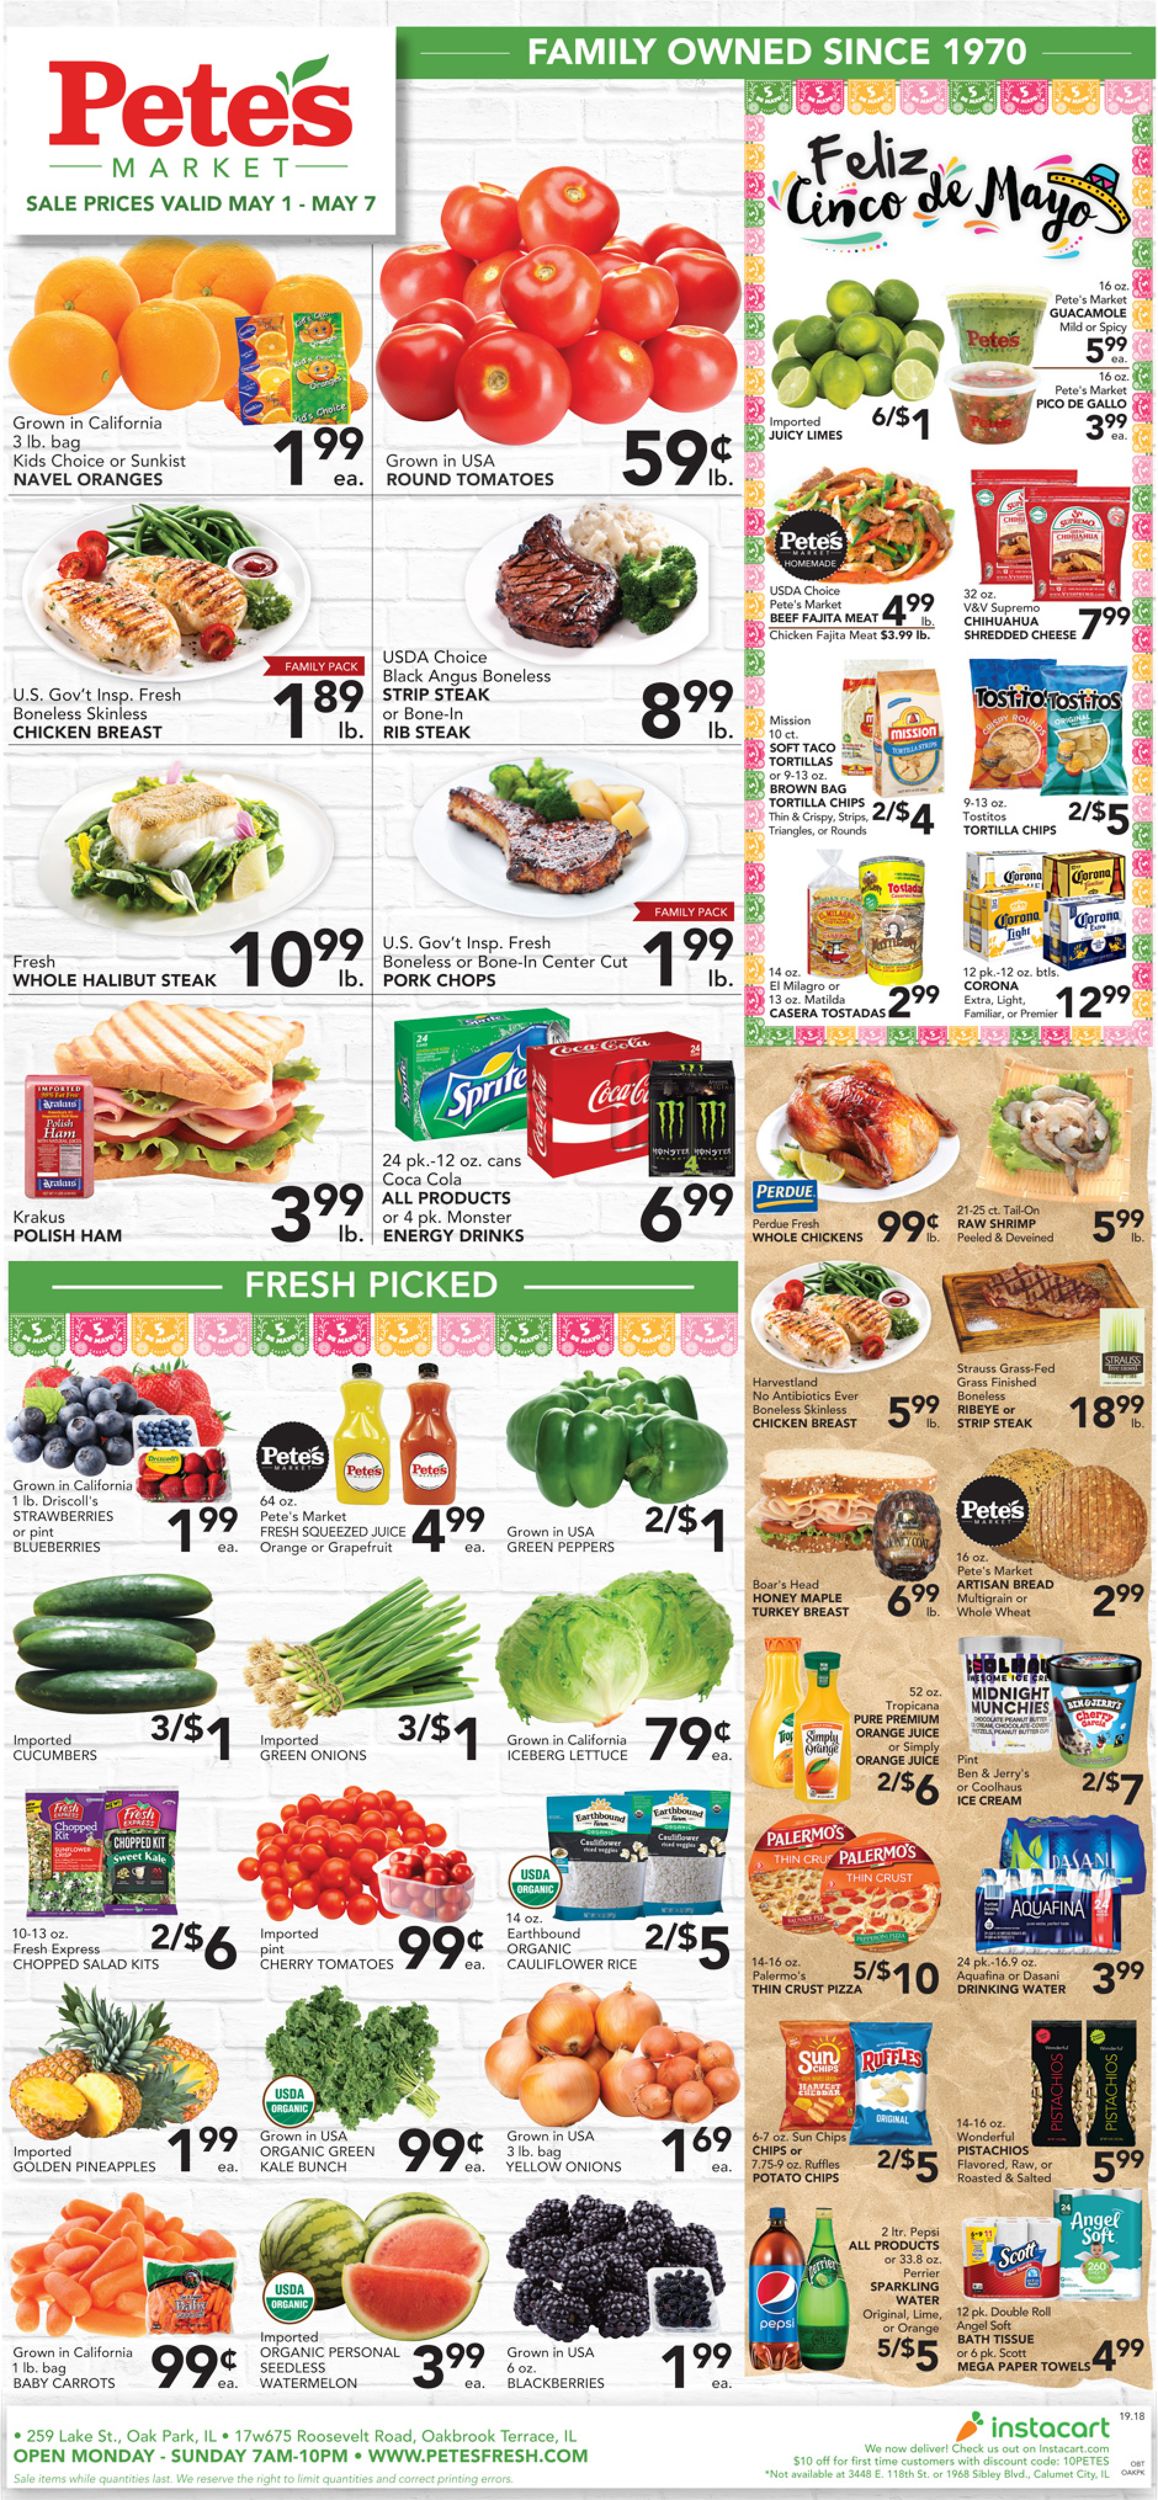 Pete's Fresh Market Current weekly ad 05/01 - 05/07/2019 - frequent-ads.com